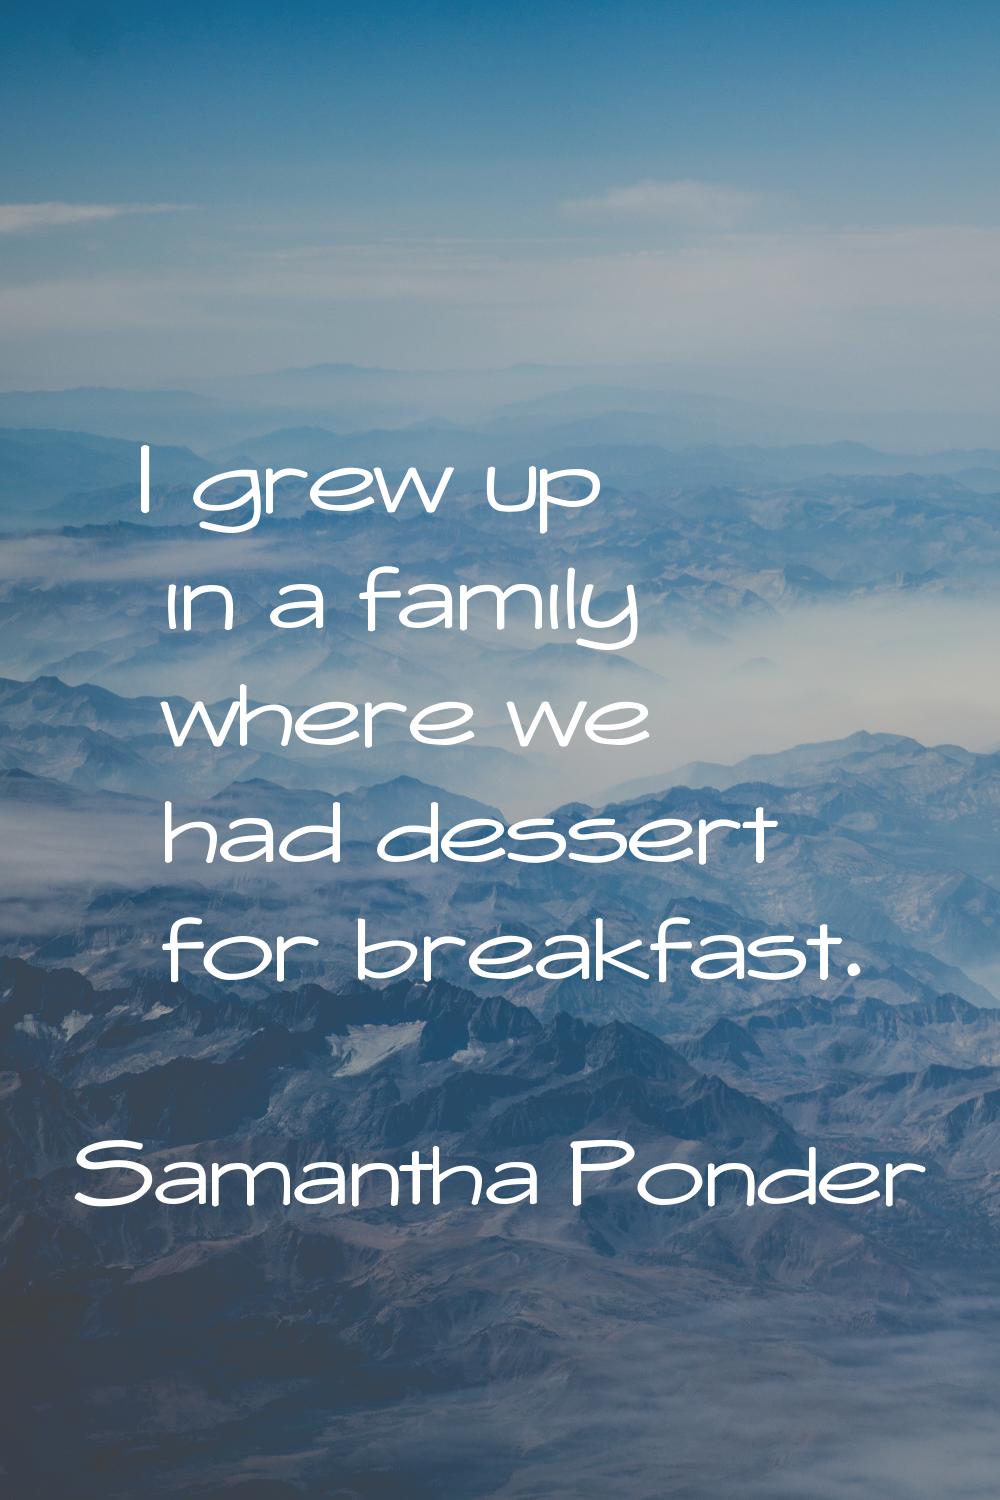 I grew up in a family where we had dessert for breakfast.